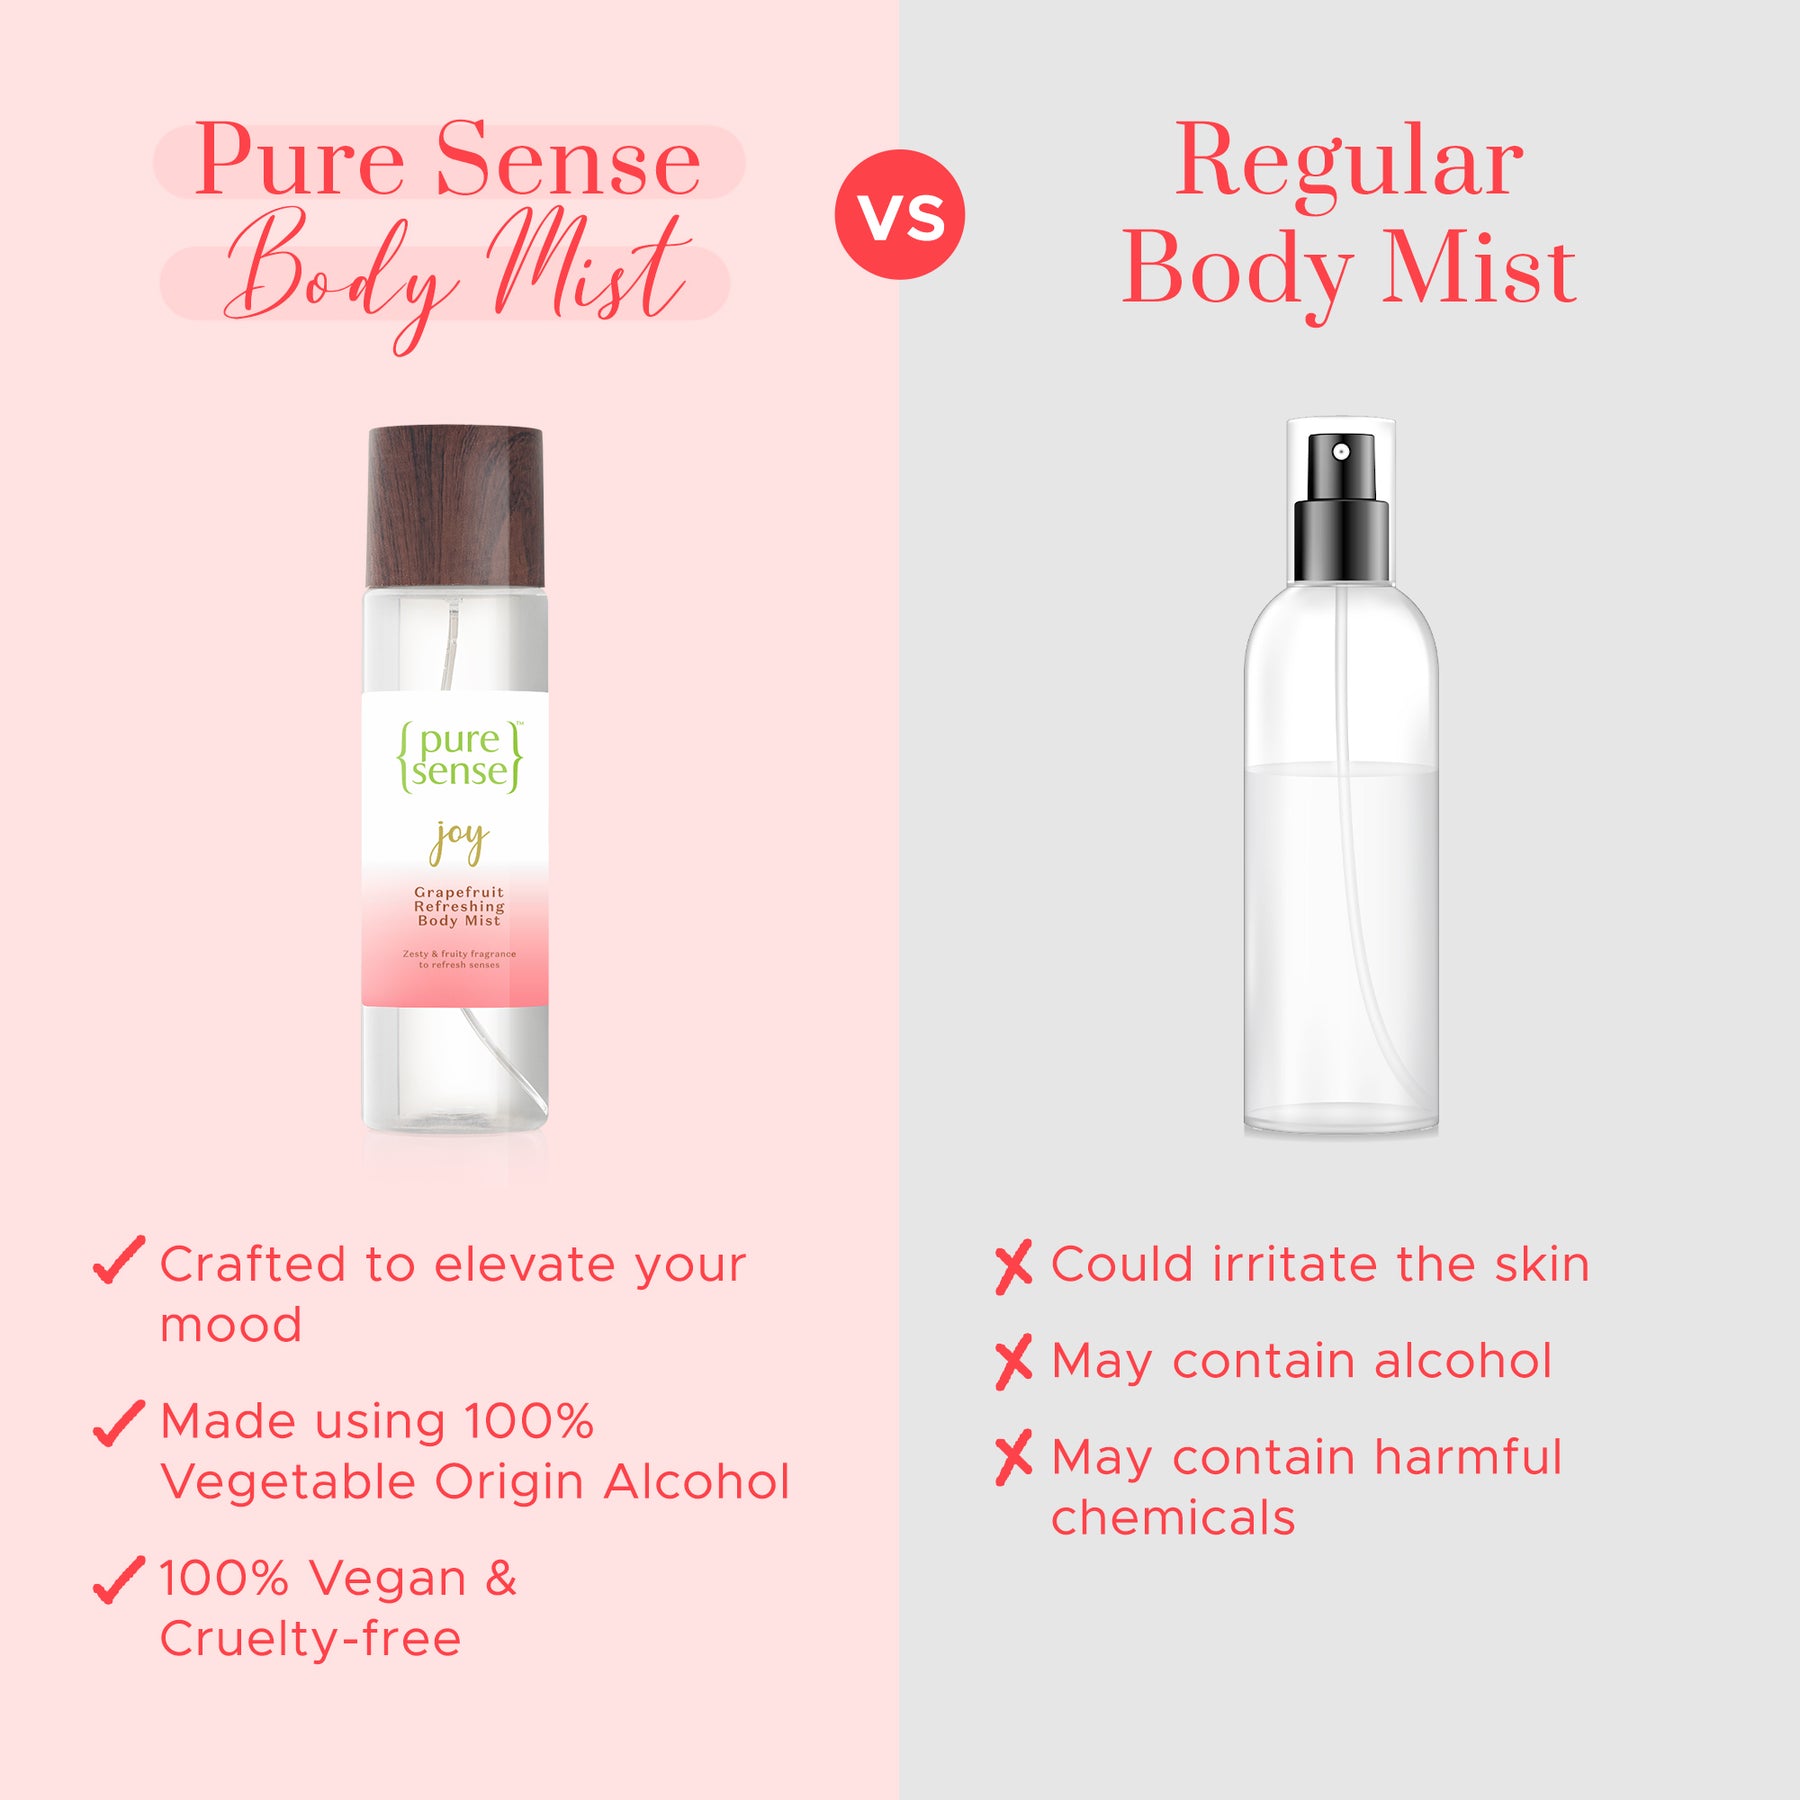 [CRED] Joy Grapefruit Refreshing Body Mist | From the makers of Parachute Advansed | 150 ml - PureSense